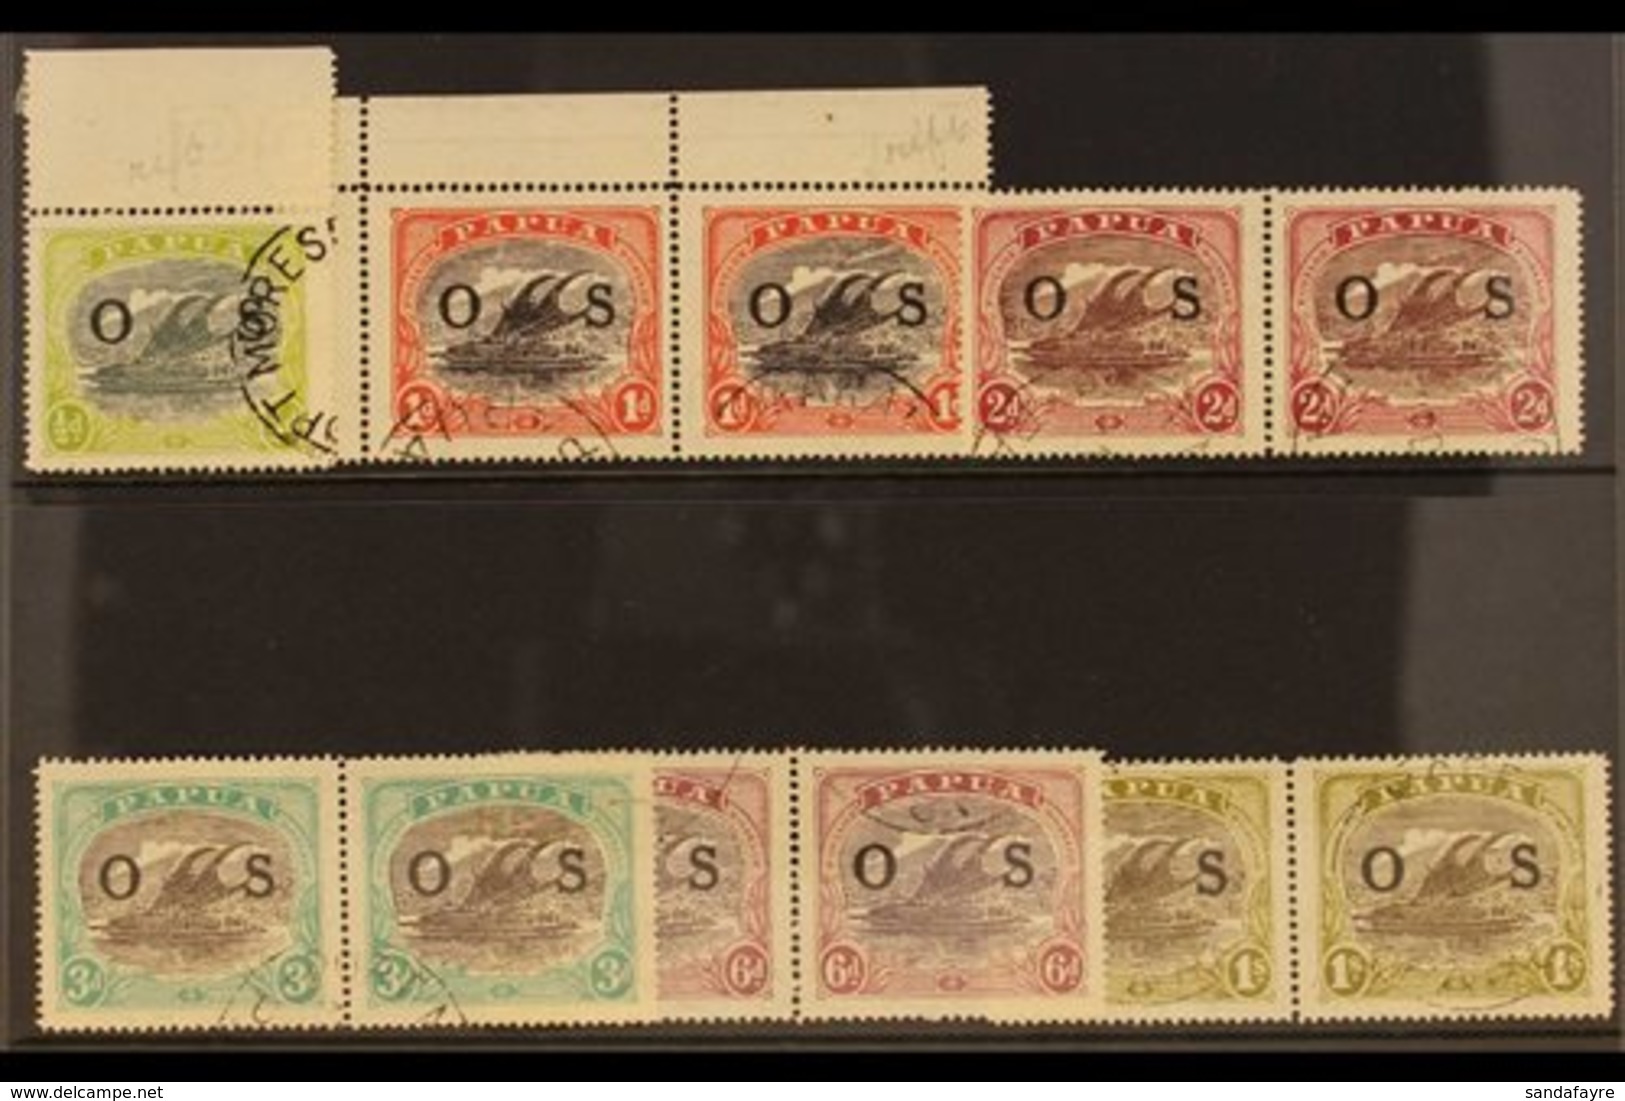 OFFICIALS WITH "RIFT IN CLOUD" FLAW  1931-32. VARIETIES. An "O S" Overprinted Fine Used Range Bearing "RIFT IN CLOUD"  V - Papoea-Nieuw-Guinea